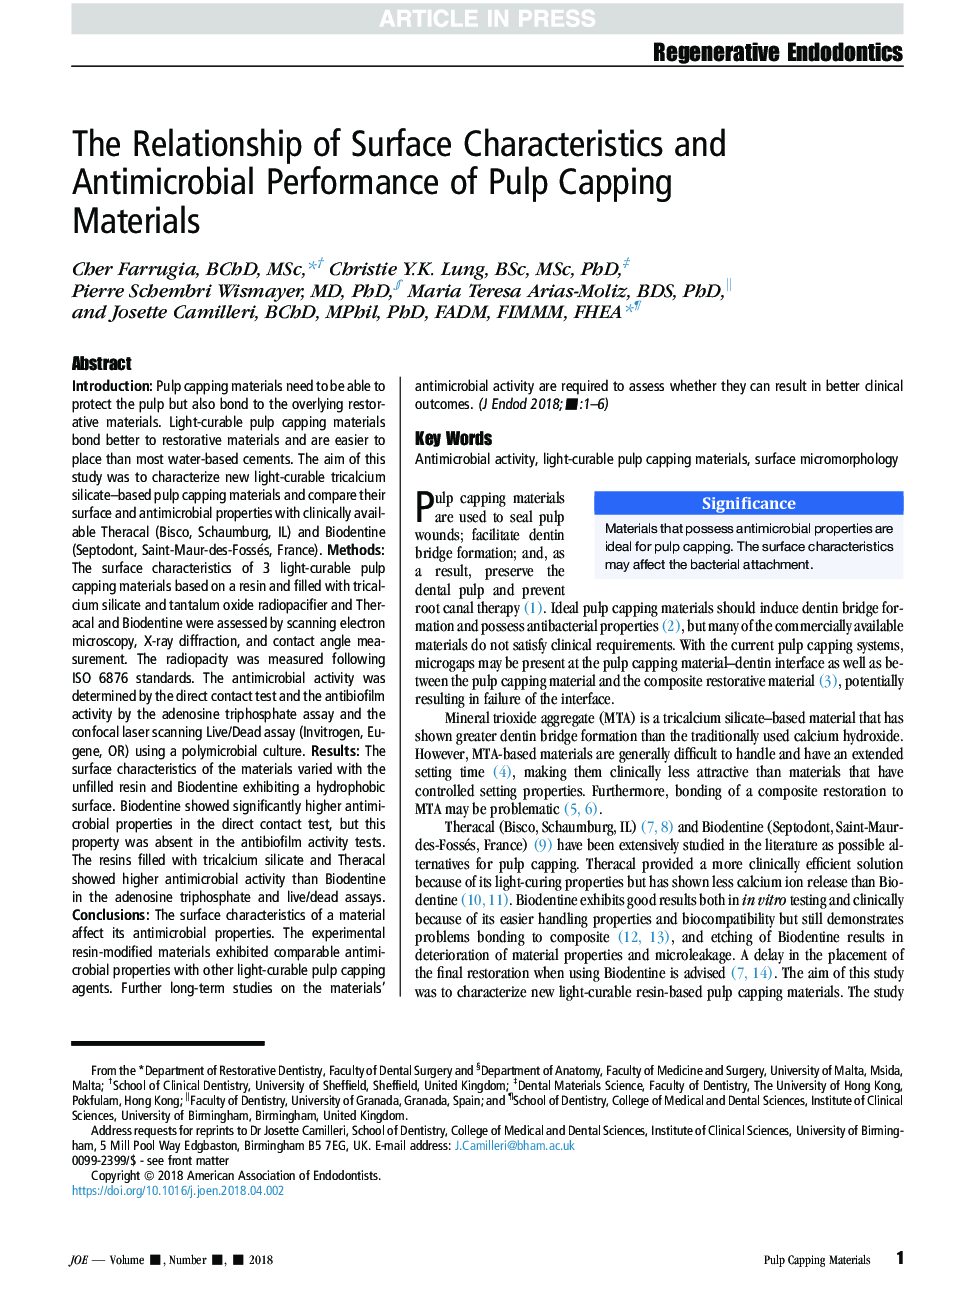 The Relationship of Surface Characteristics and Antimicrobial Performance of Pulp Capping Materials